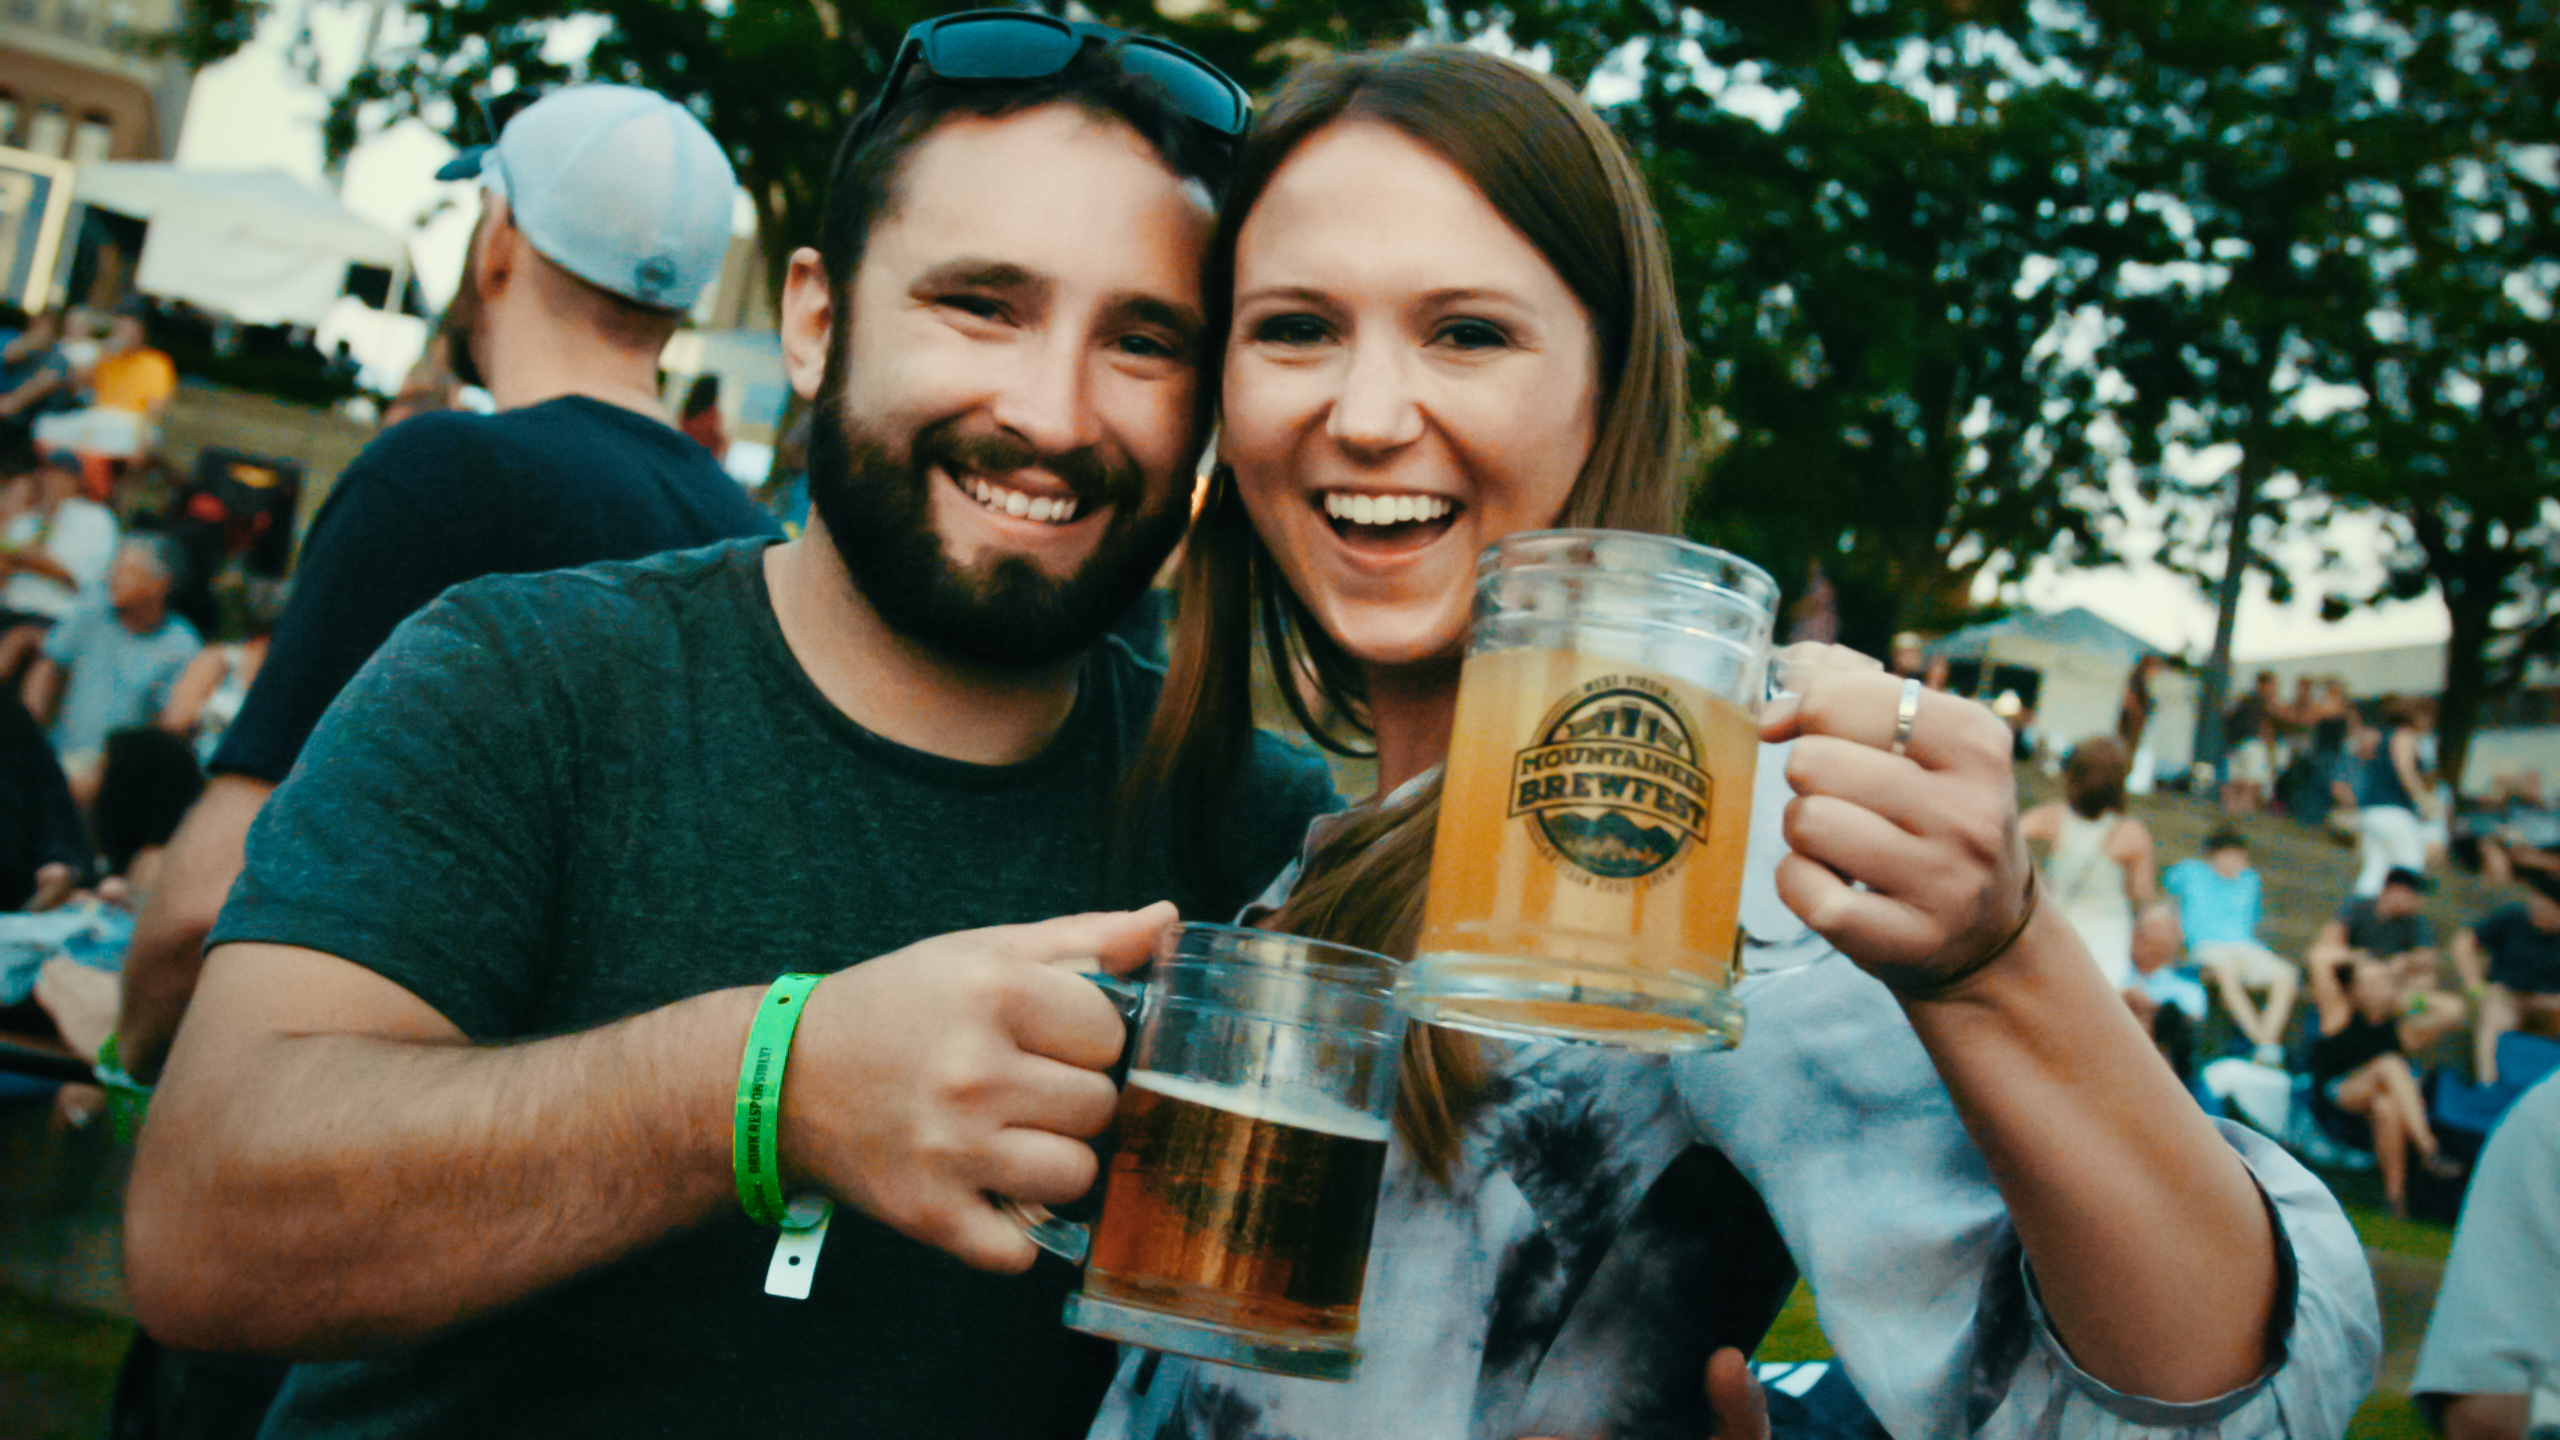 Quench Your Thirst at the Mountaineer Brewfest